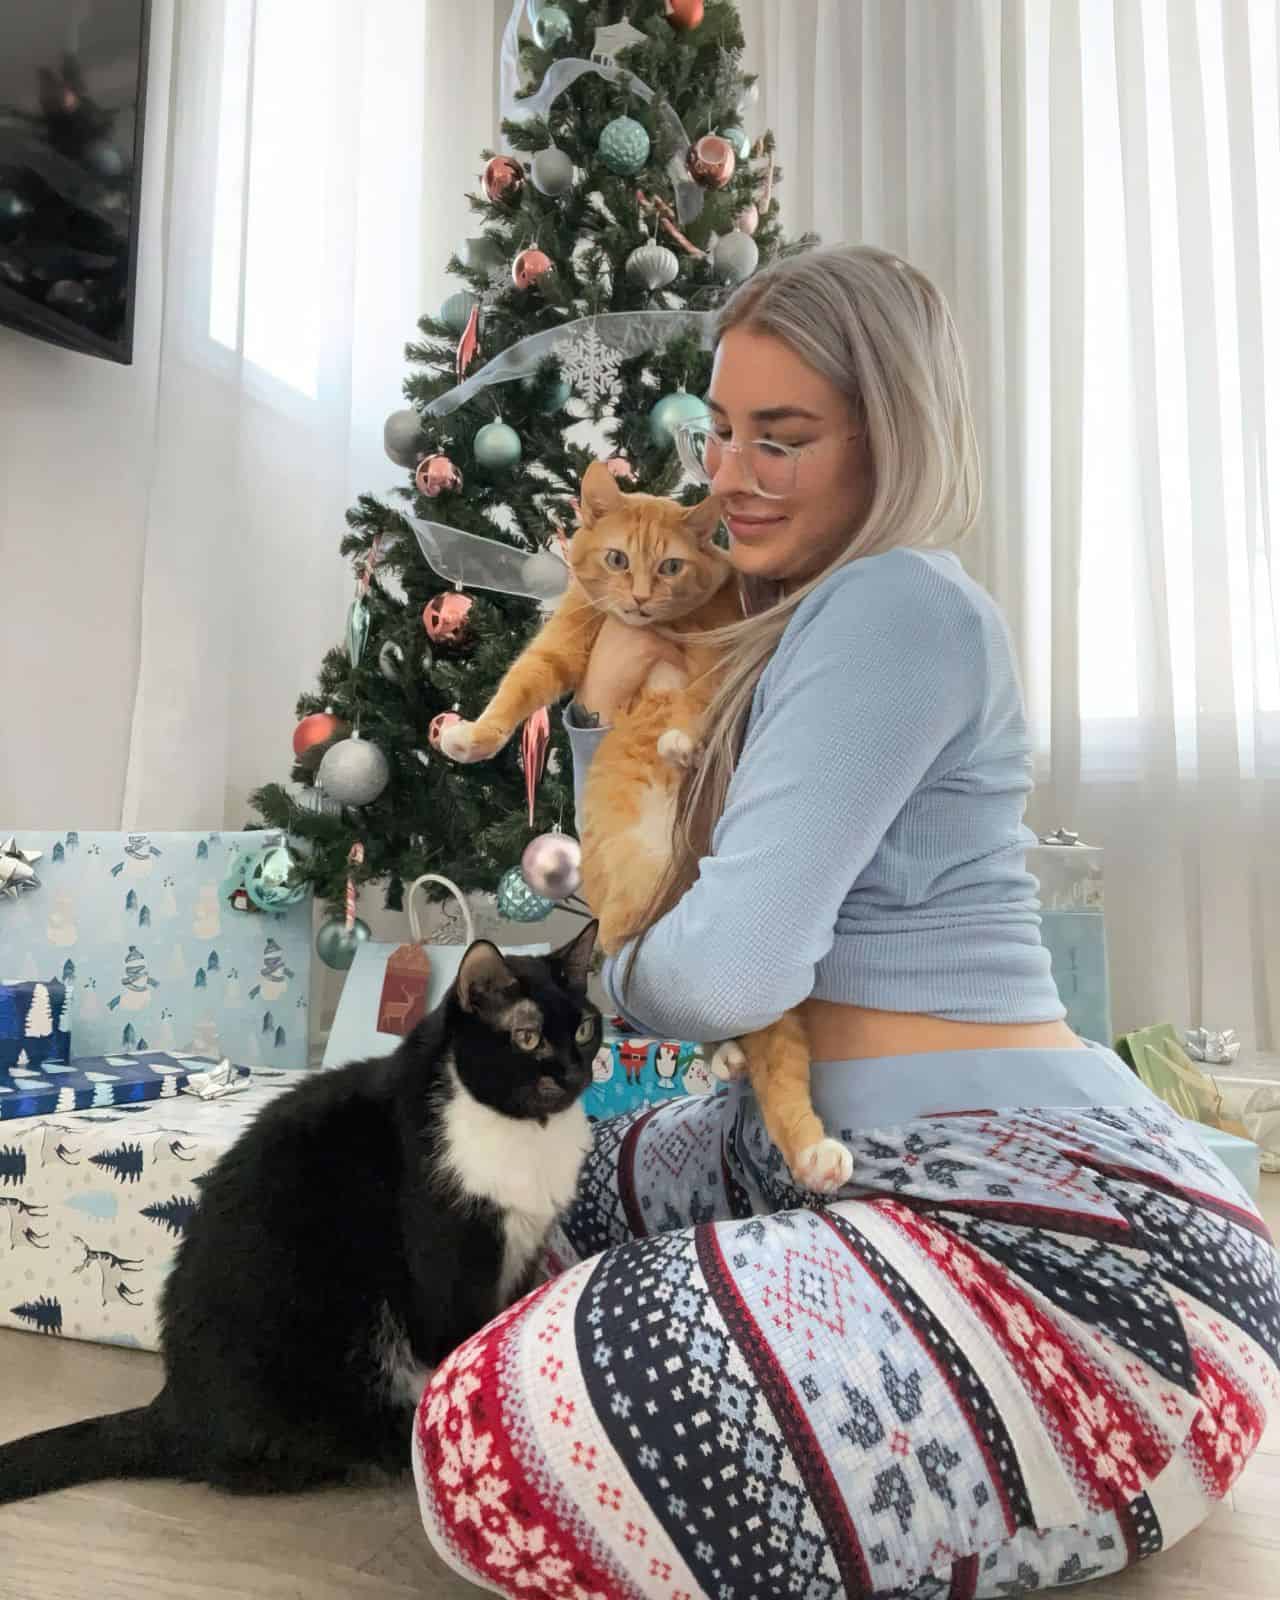 jen brett with her cat at christmas